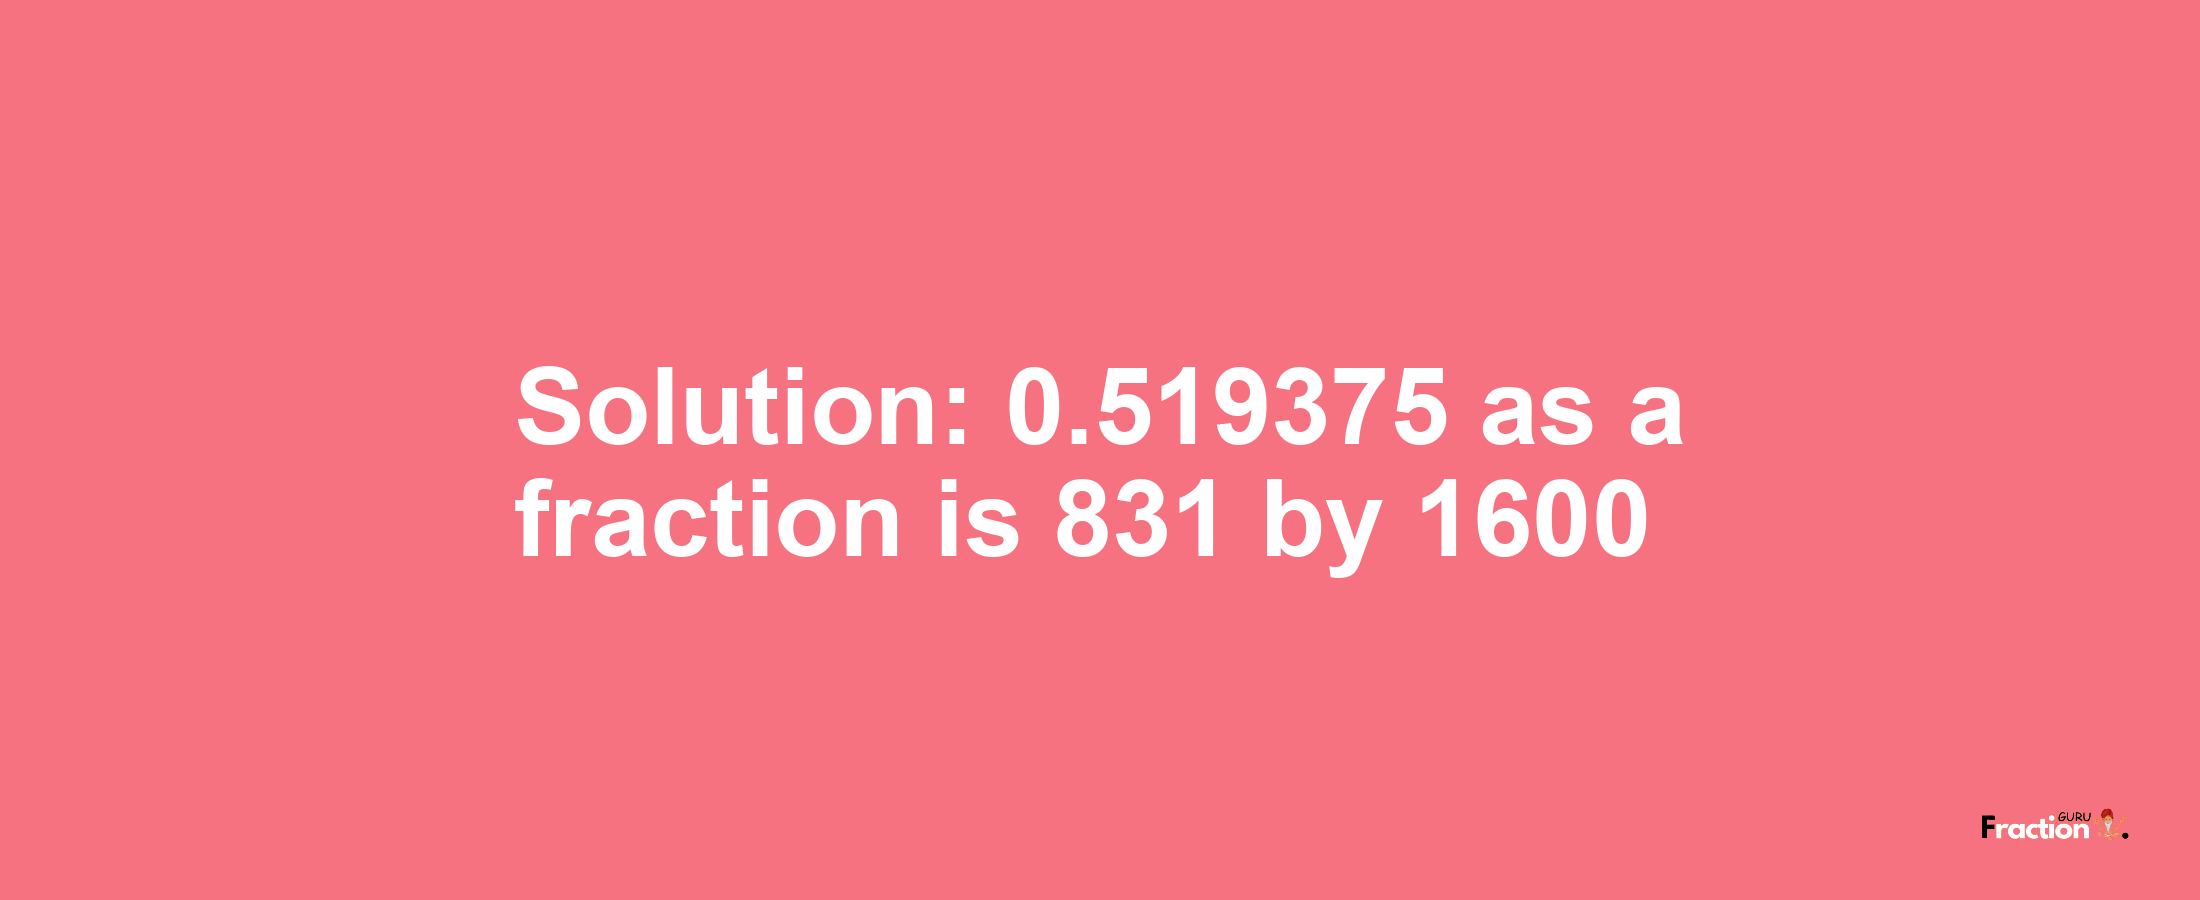 Solution:0.519375 as a fraction is 831/1600